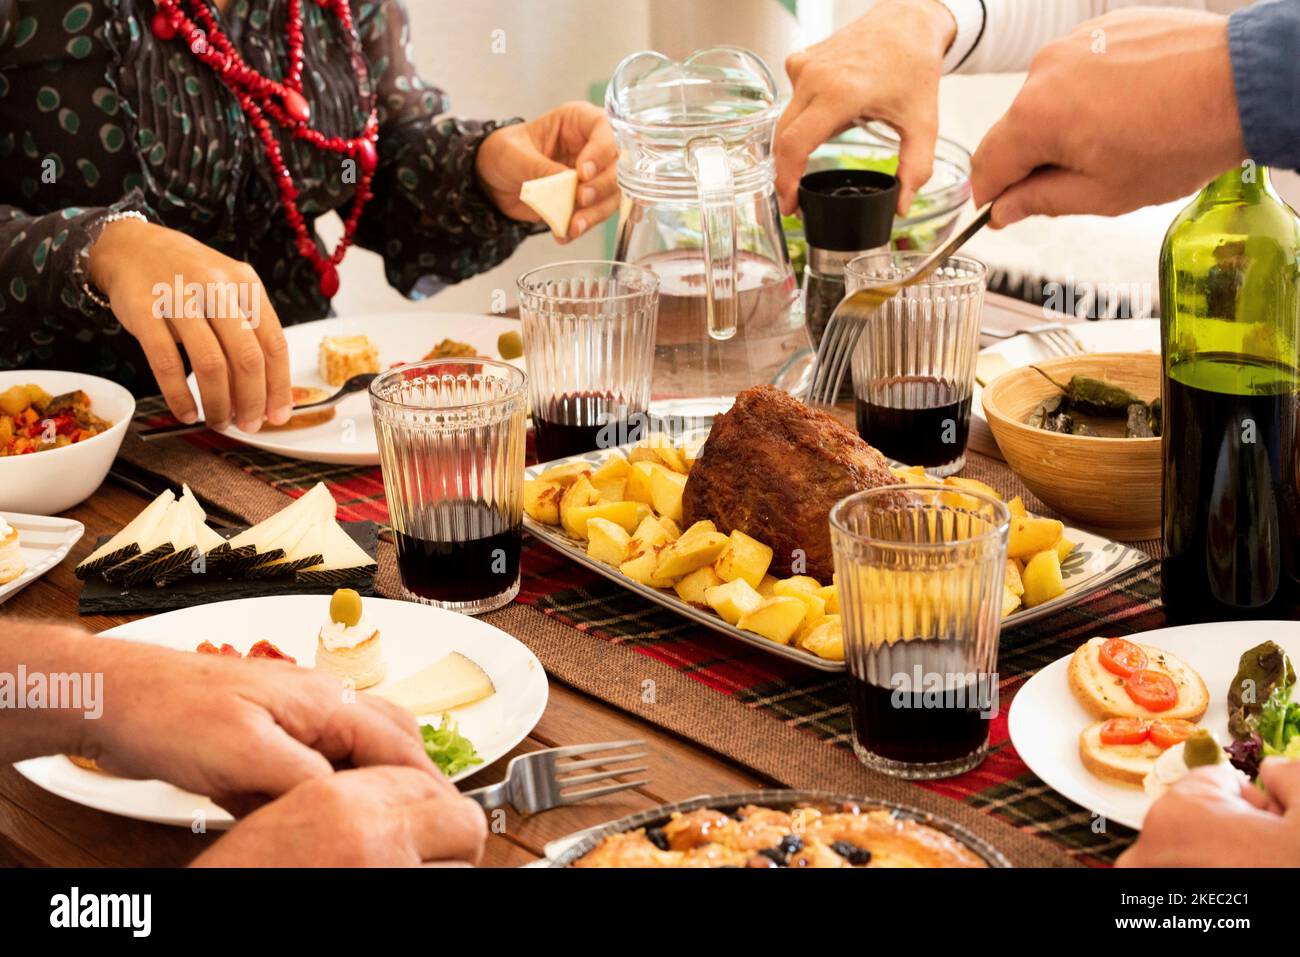 group of four people eating and drinking together at home - celerbating something with chicken and wine - hands taking food from the middle of the table Stock Photo